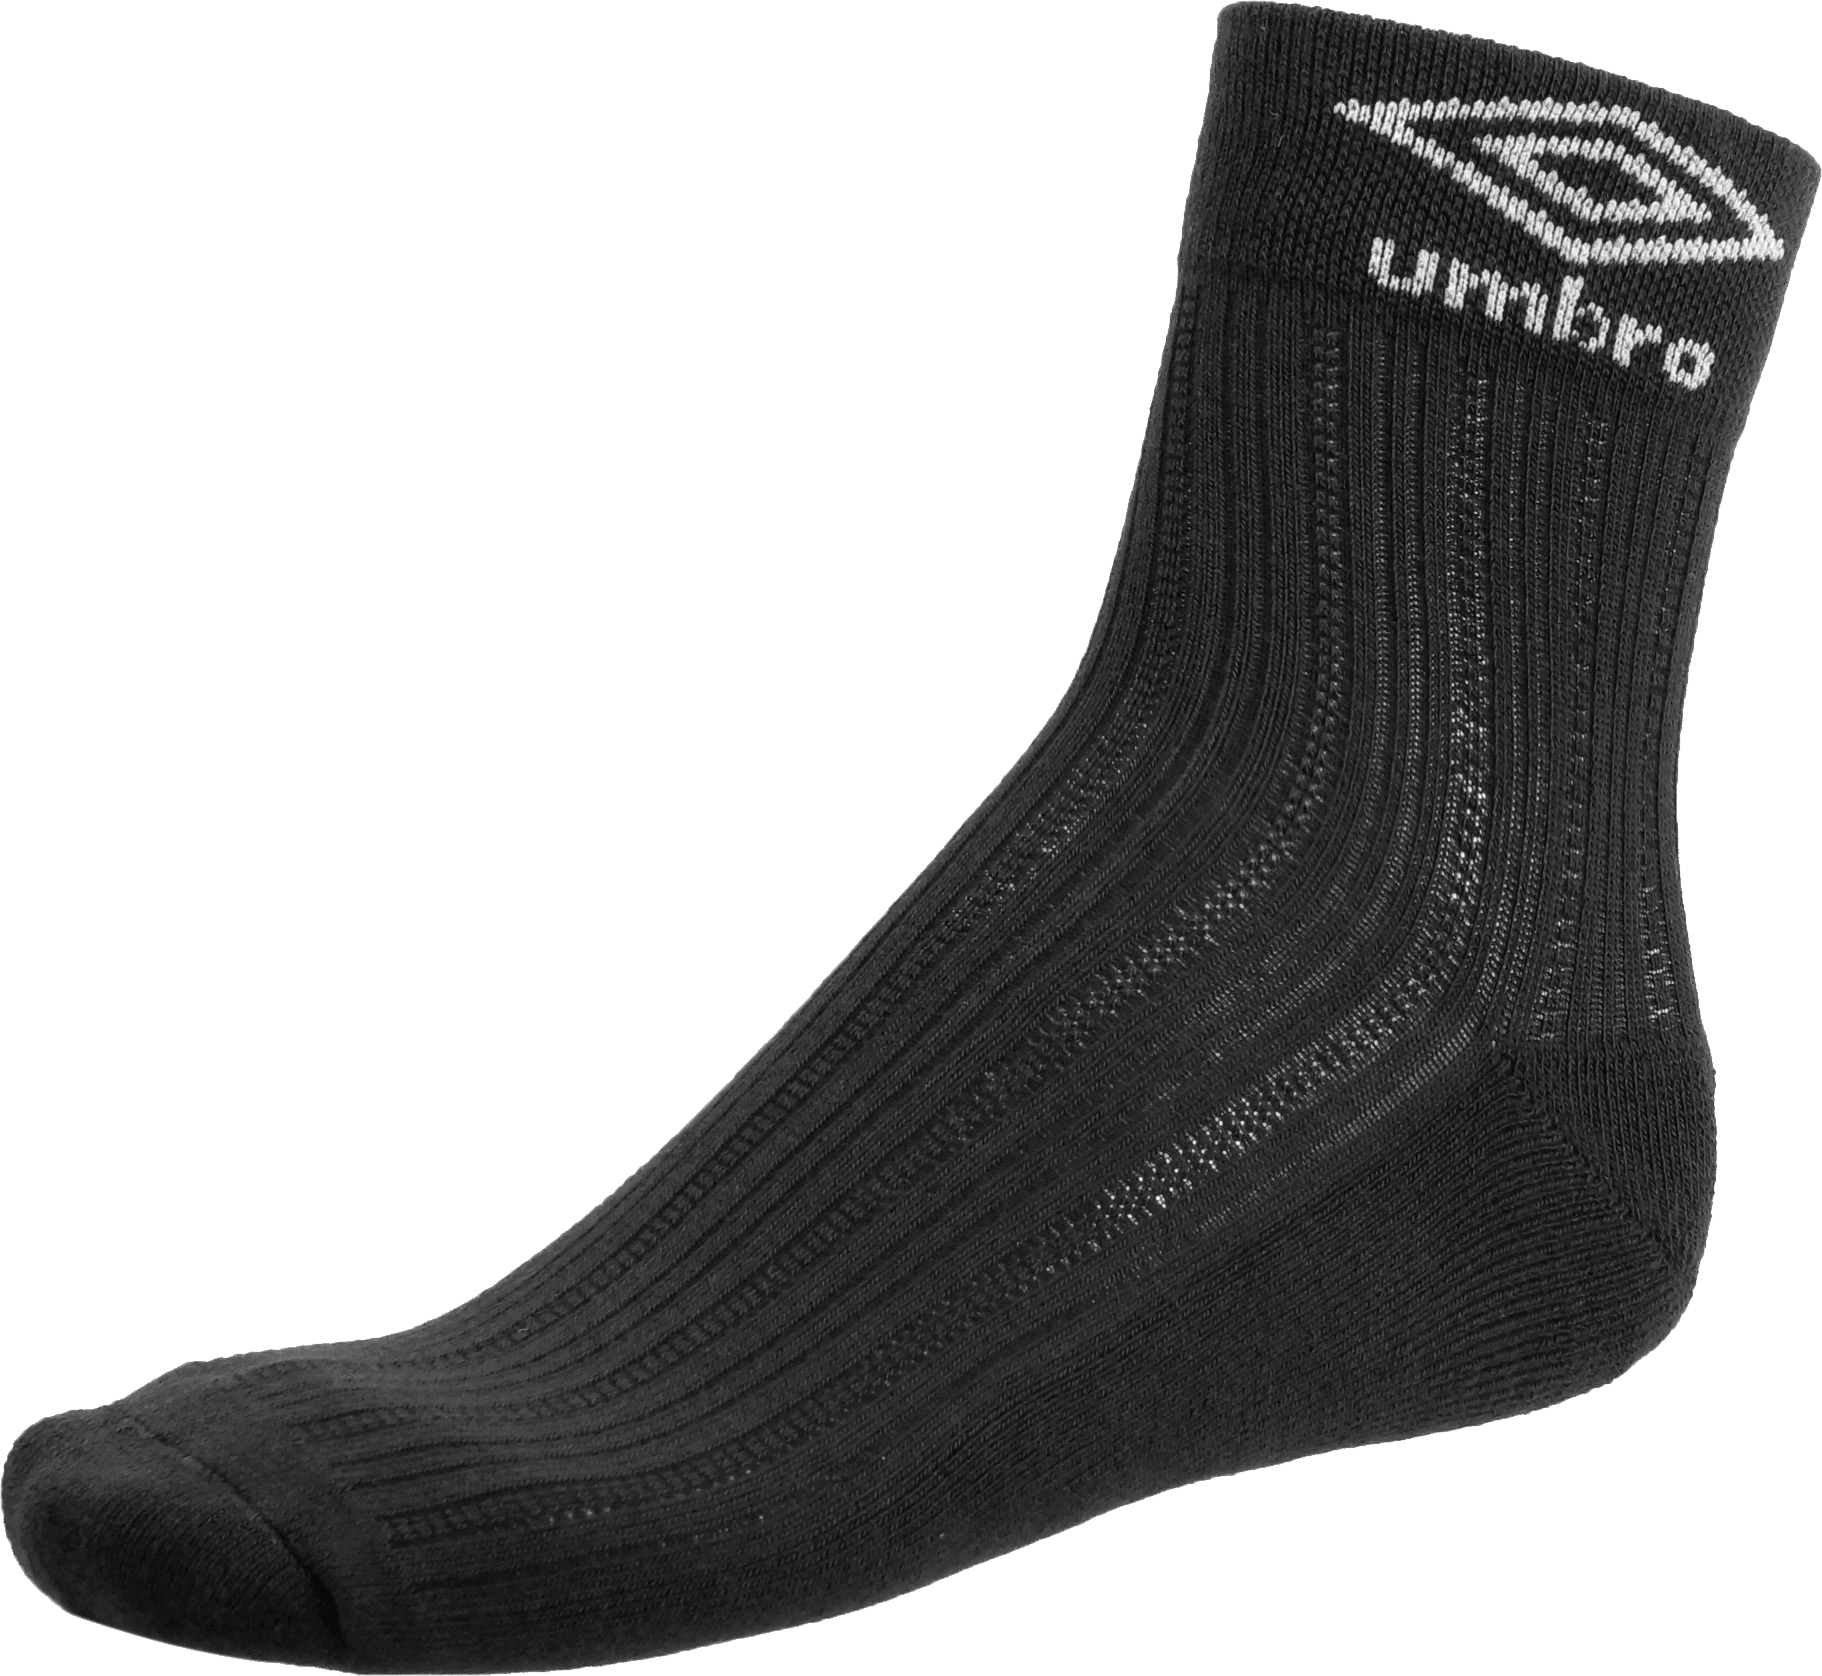 A Black Sock With White Logo